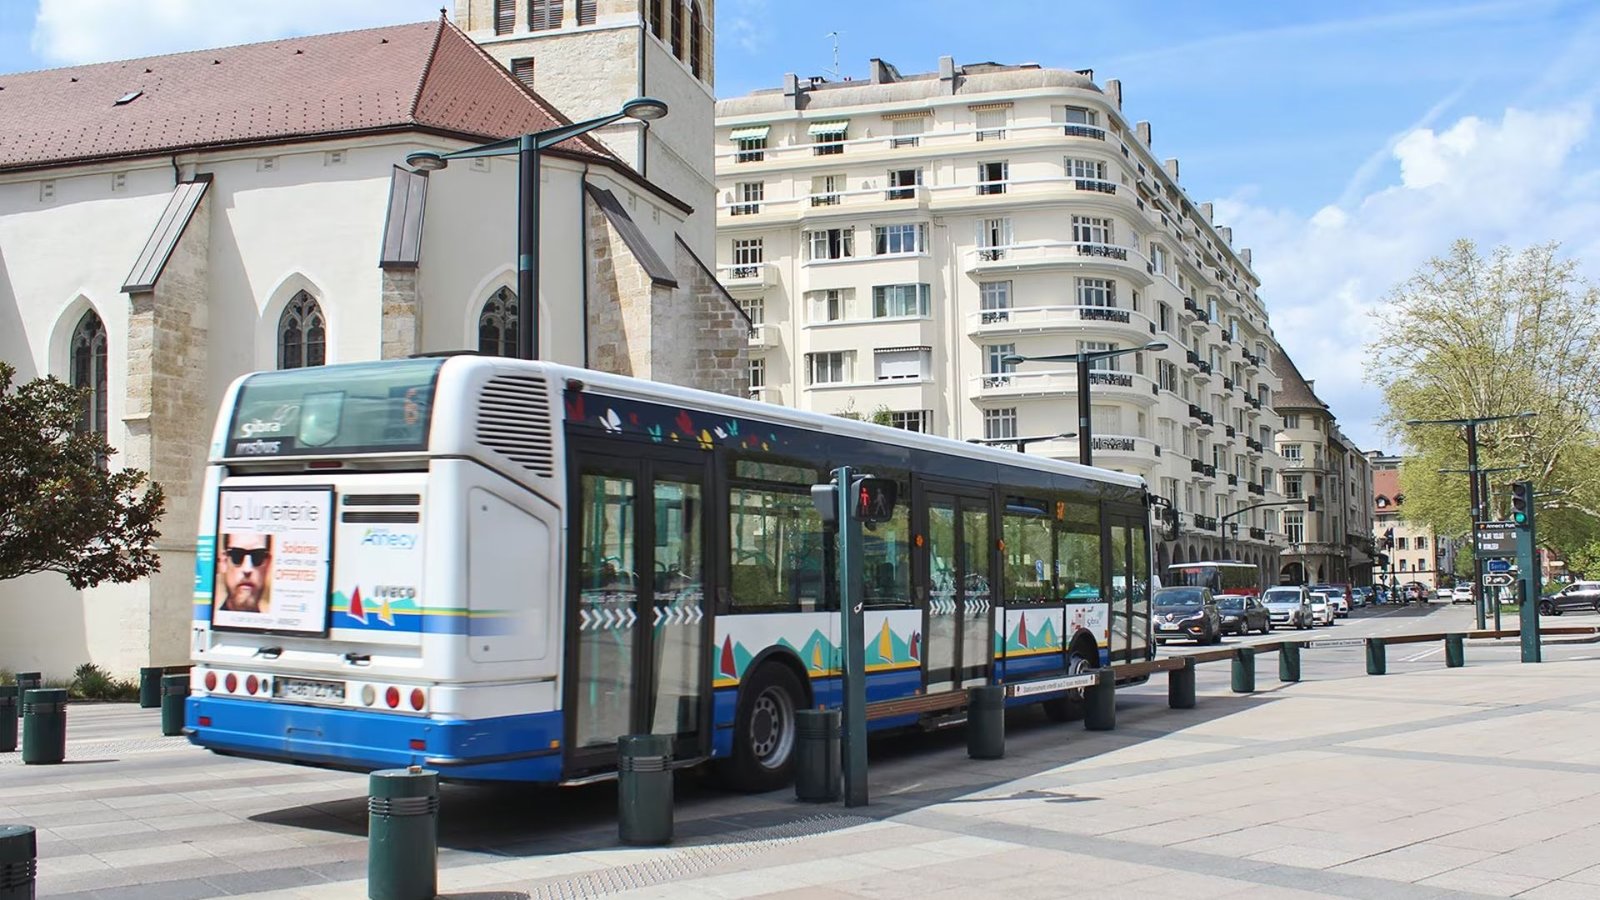 A Bus in Annecy City